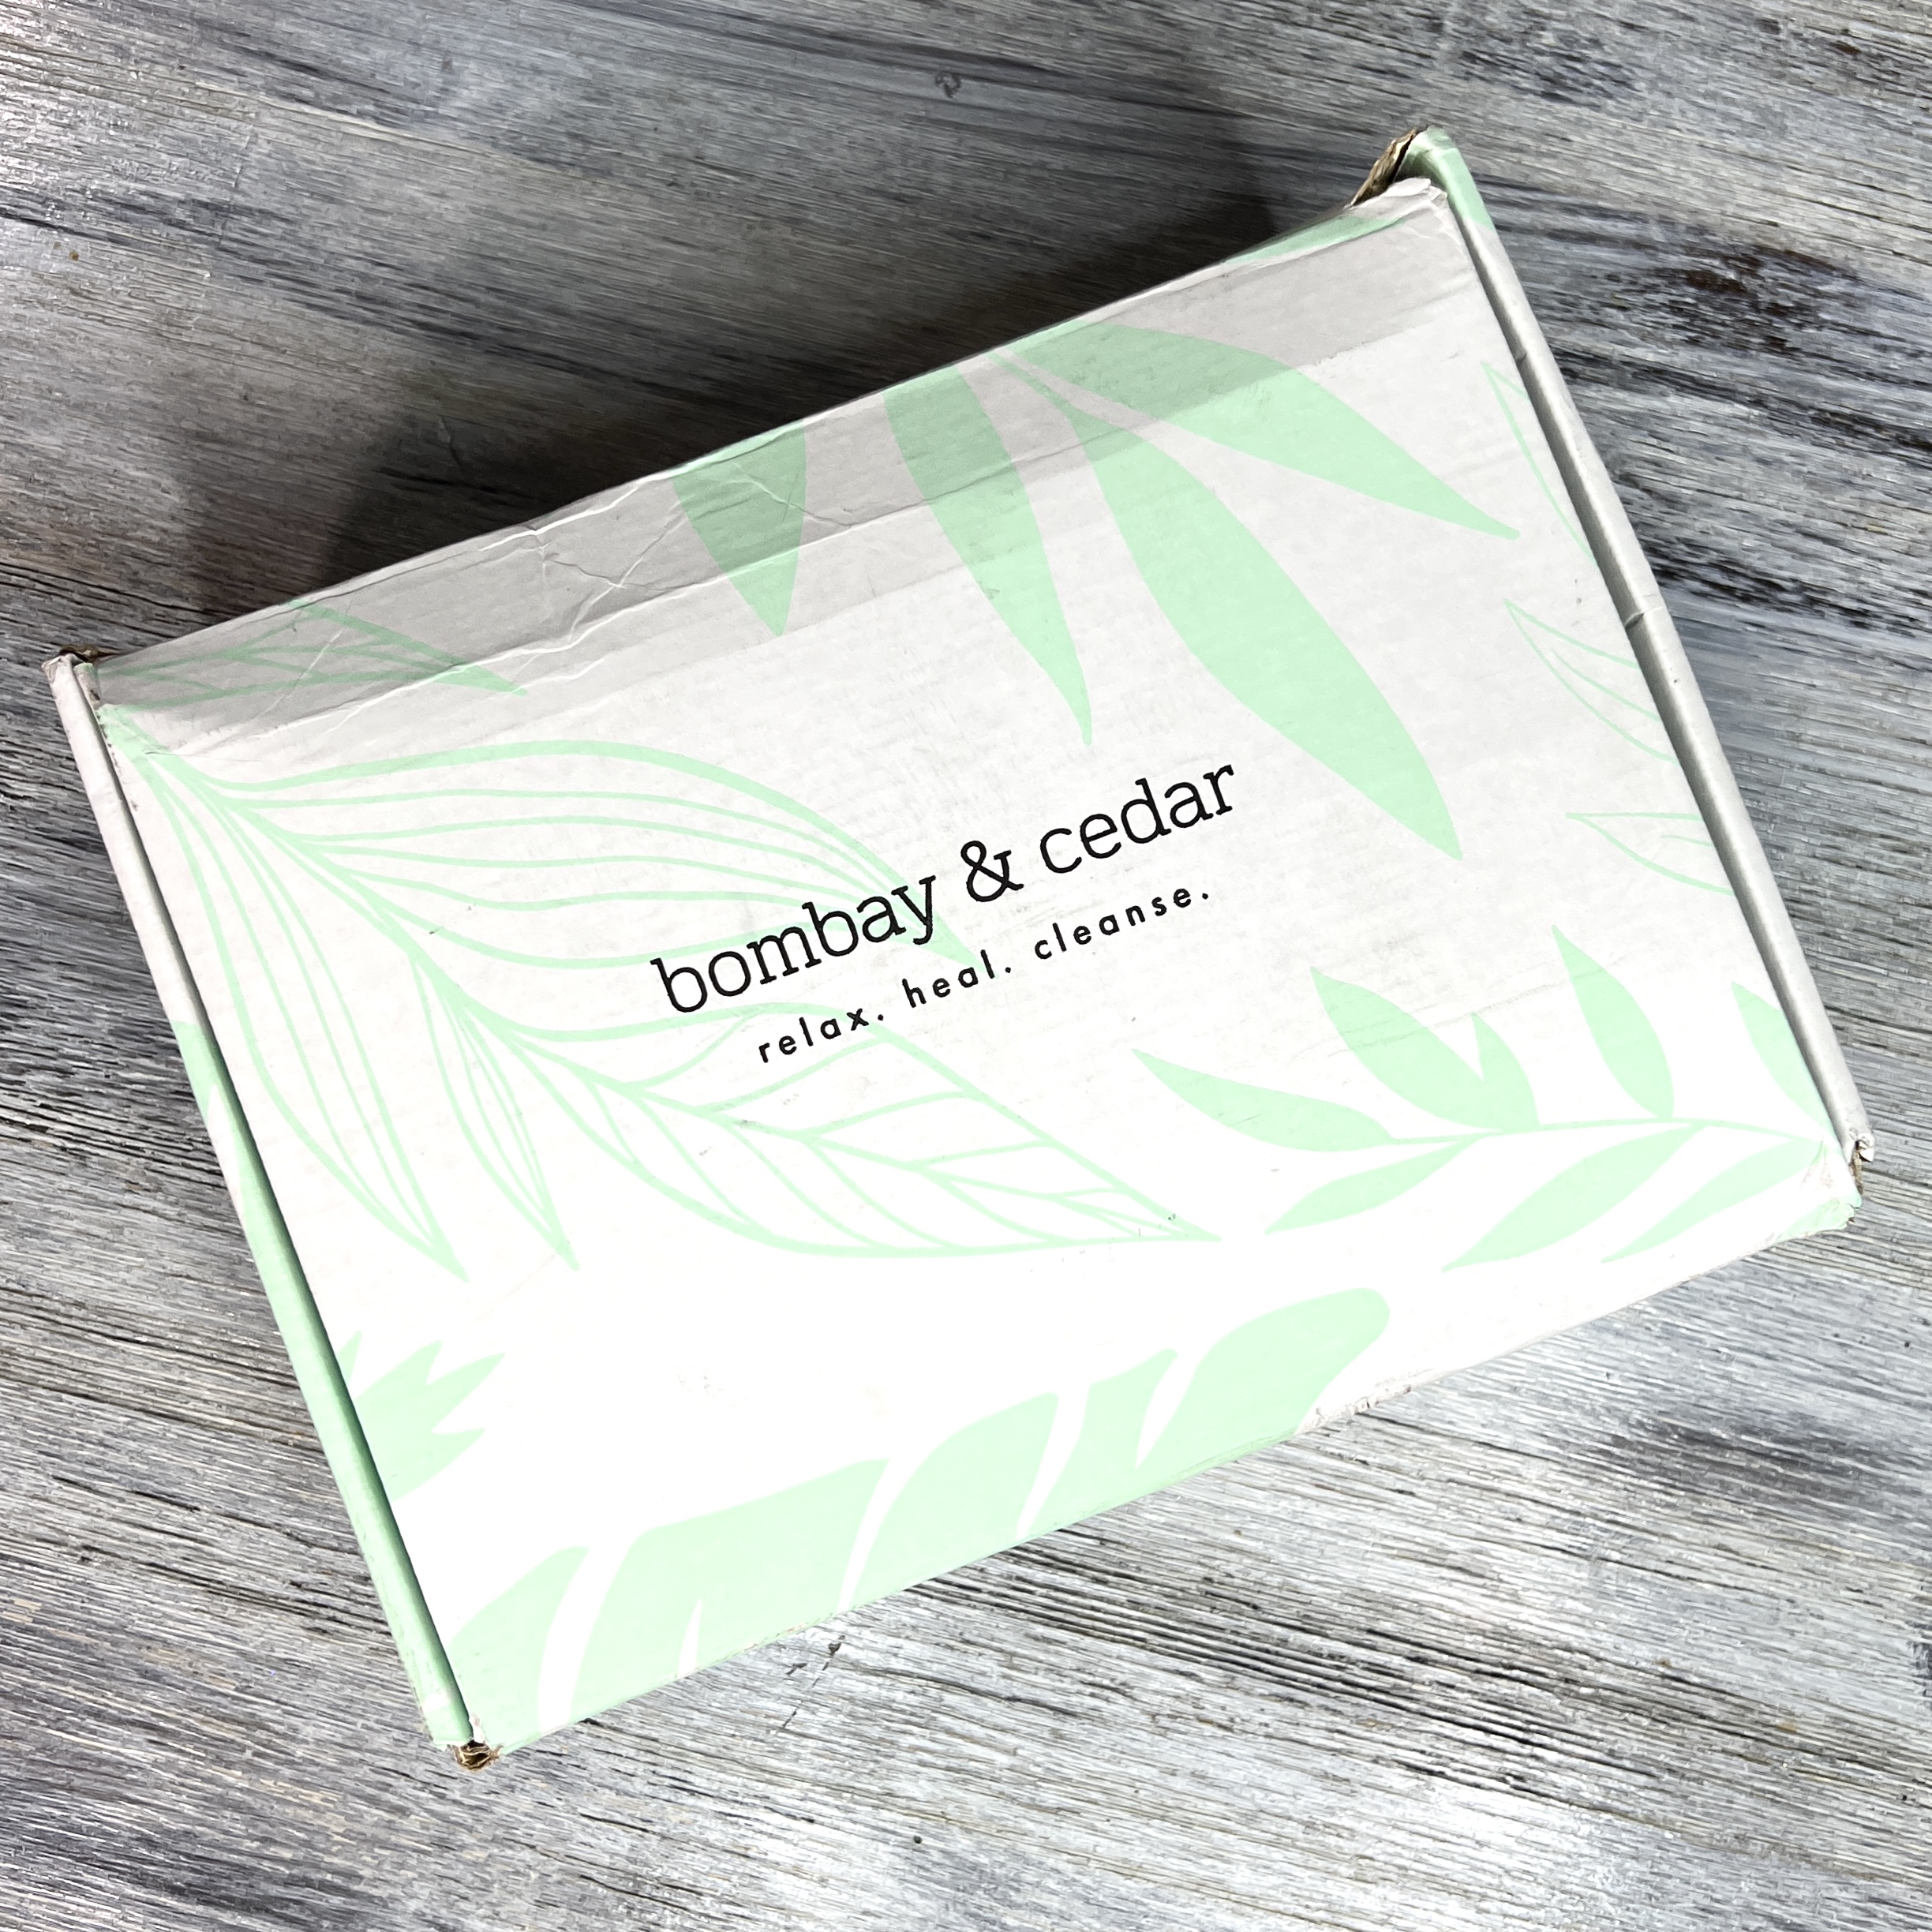 Box for Bombay and Cedar Lifestyle Box October 2021